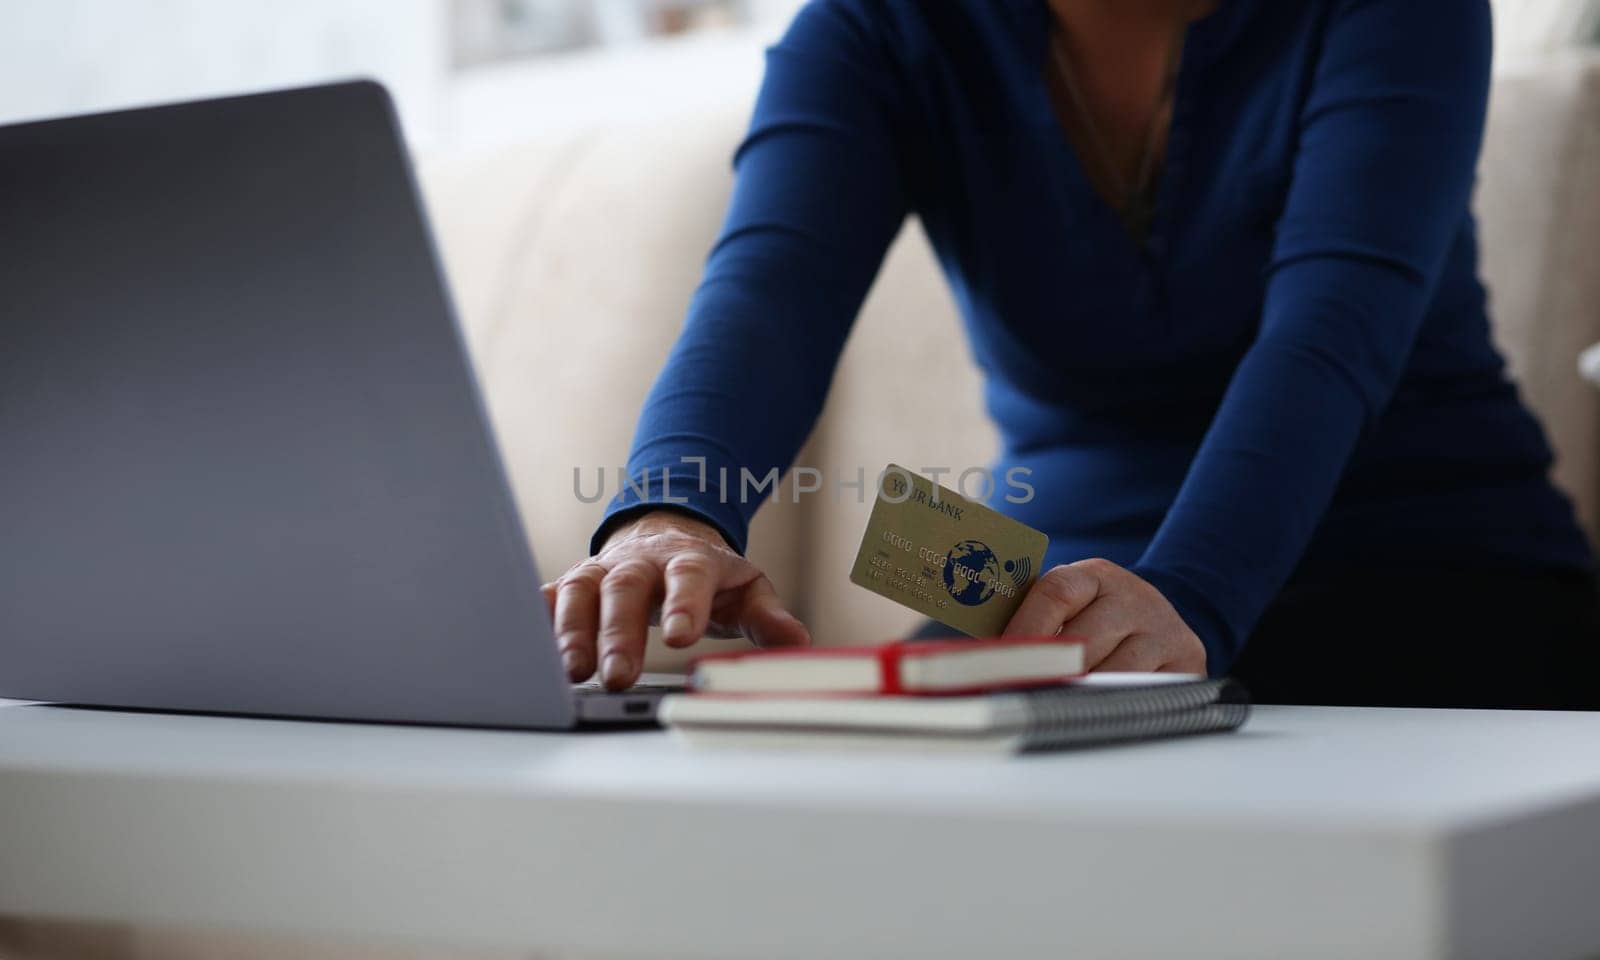 Woman enters credit card details in browser laptop. Pay loan during pandemic. Control all operations on account and check balance during period self-isolation. Buy and sell currency in online banking